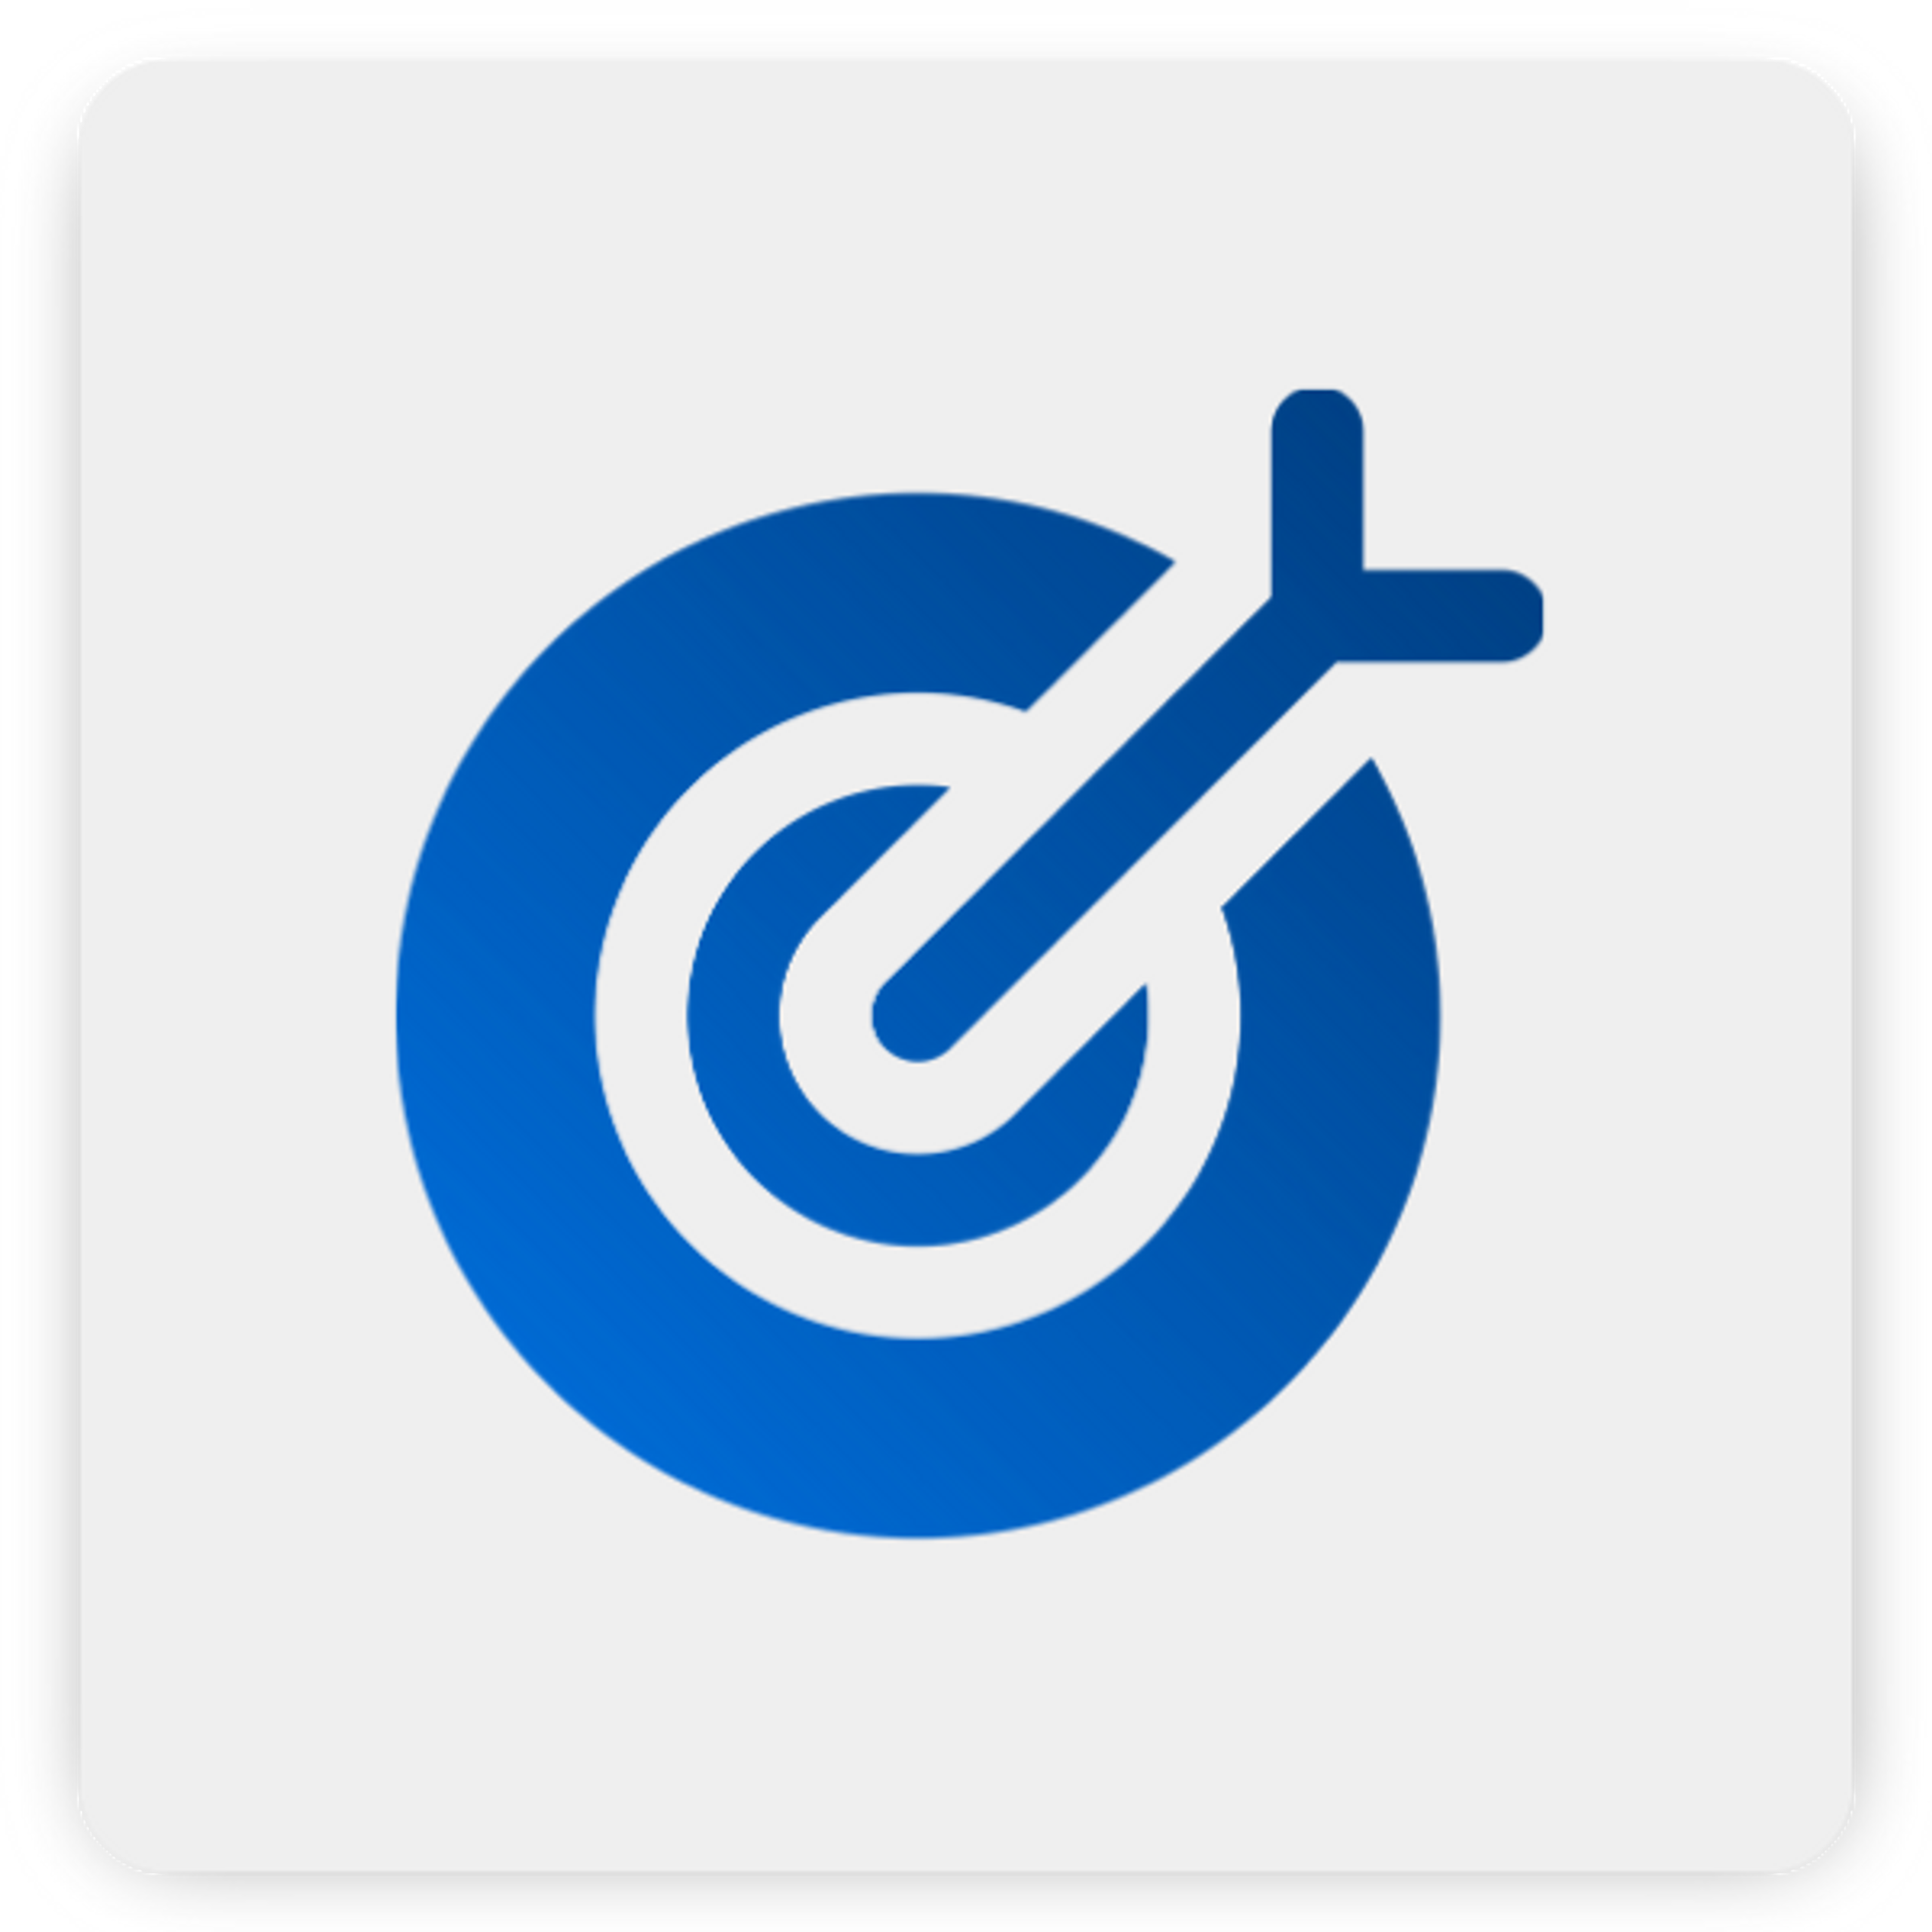 Icon of a target bullseye for meeting optimal swine and poultry production targets